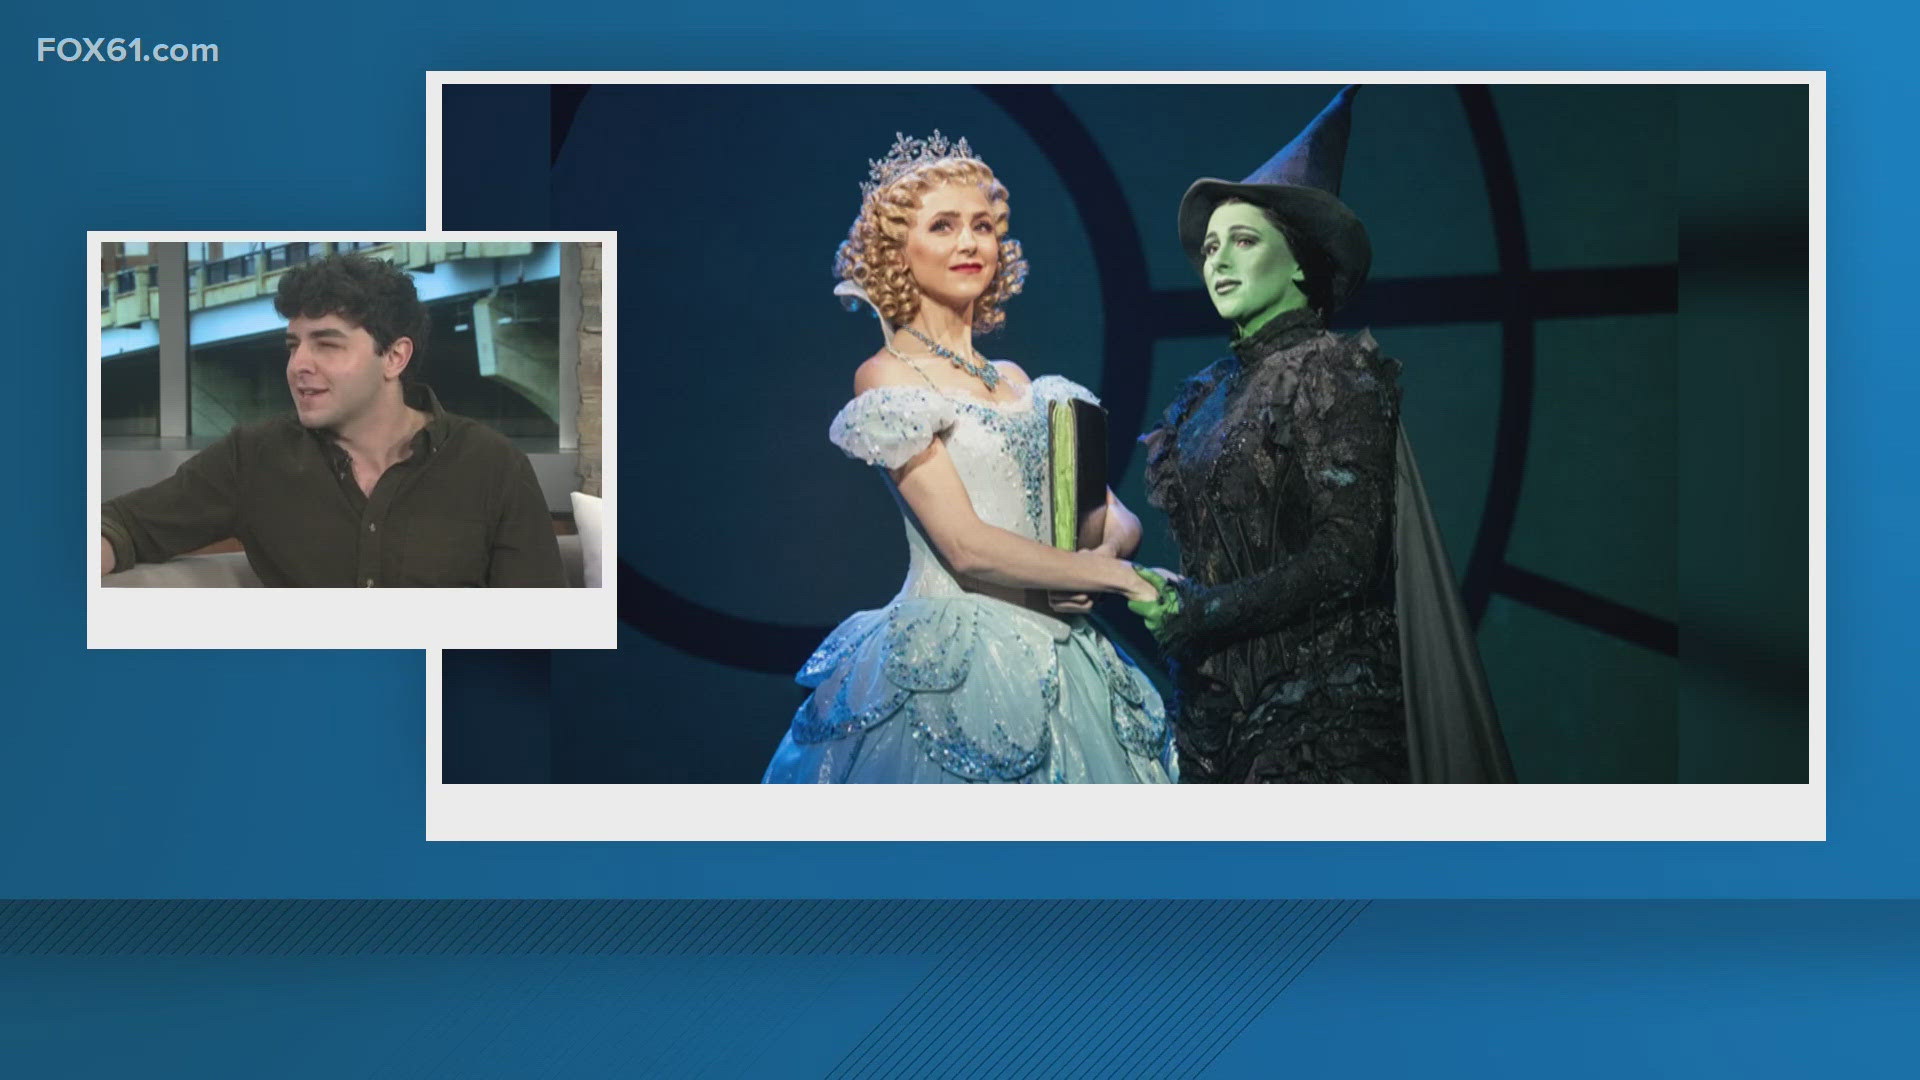 Kyle McArthur, a Connecticut native, plays the role of Boq in the Wicked national tour, now performing at The Bushnell in Hartford.